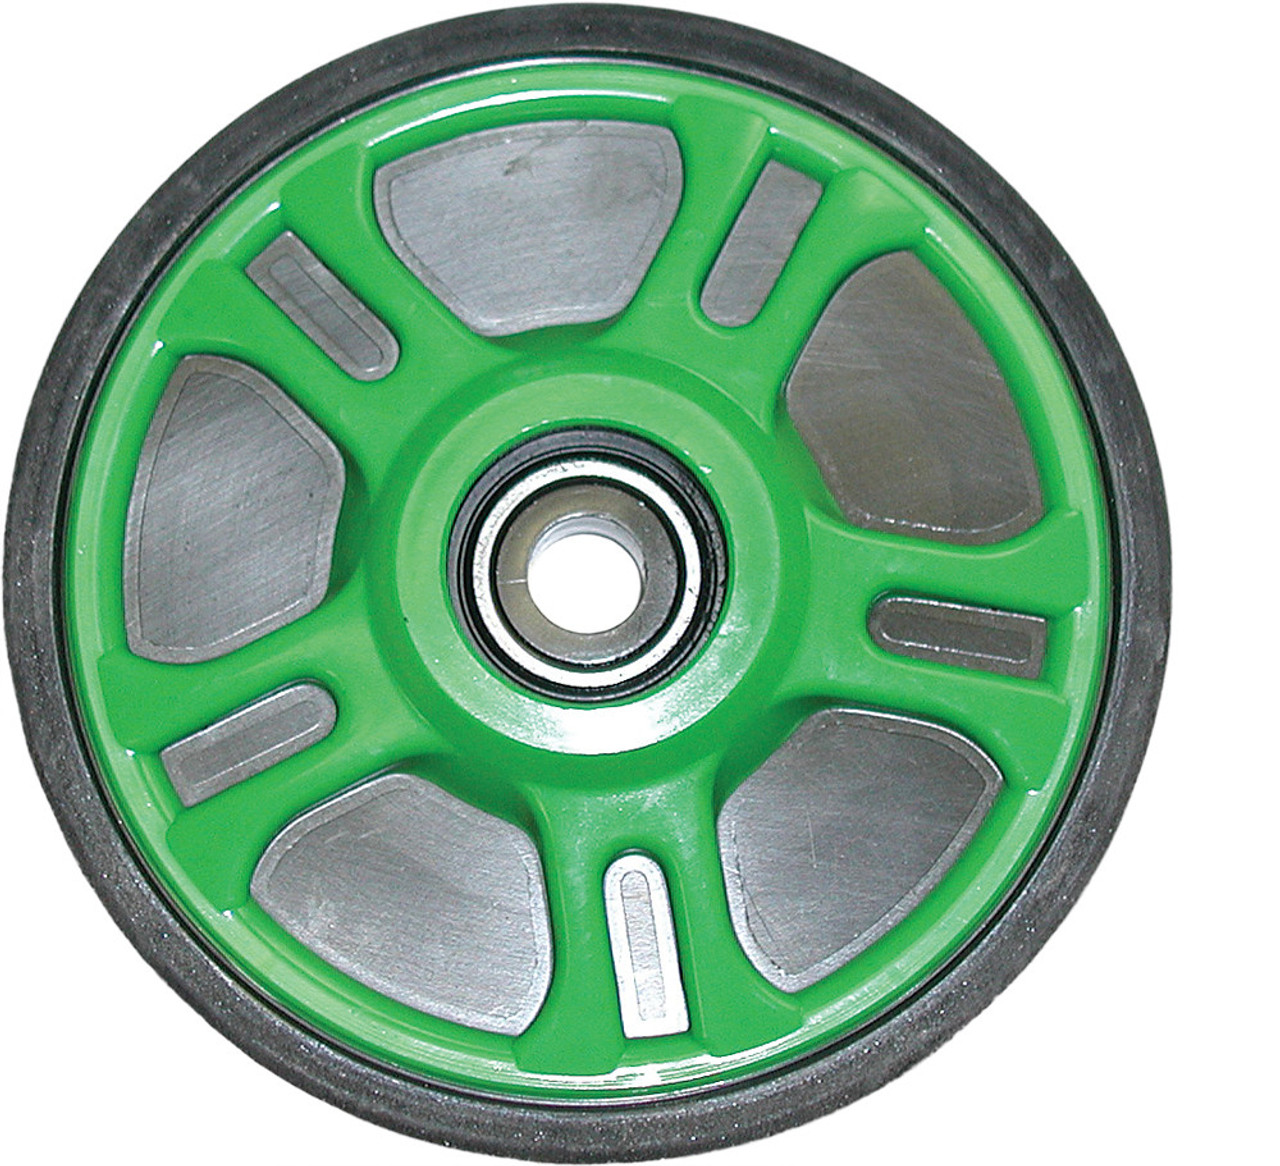 Idler Wheel compatible with Arctic Cat - Cat Green, 6.38 x .625 Part# 541-5071 OEM# 604-238